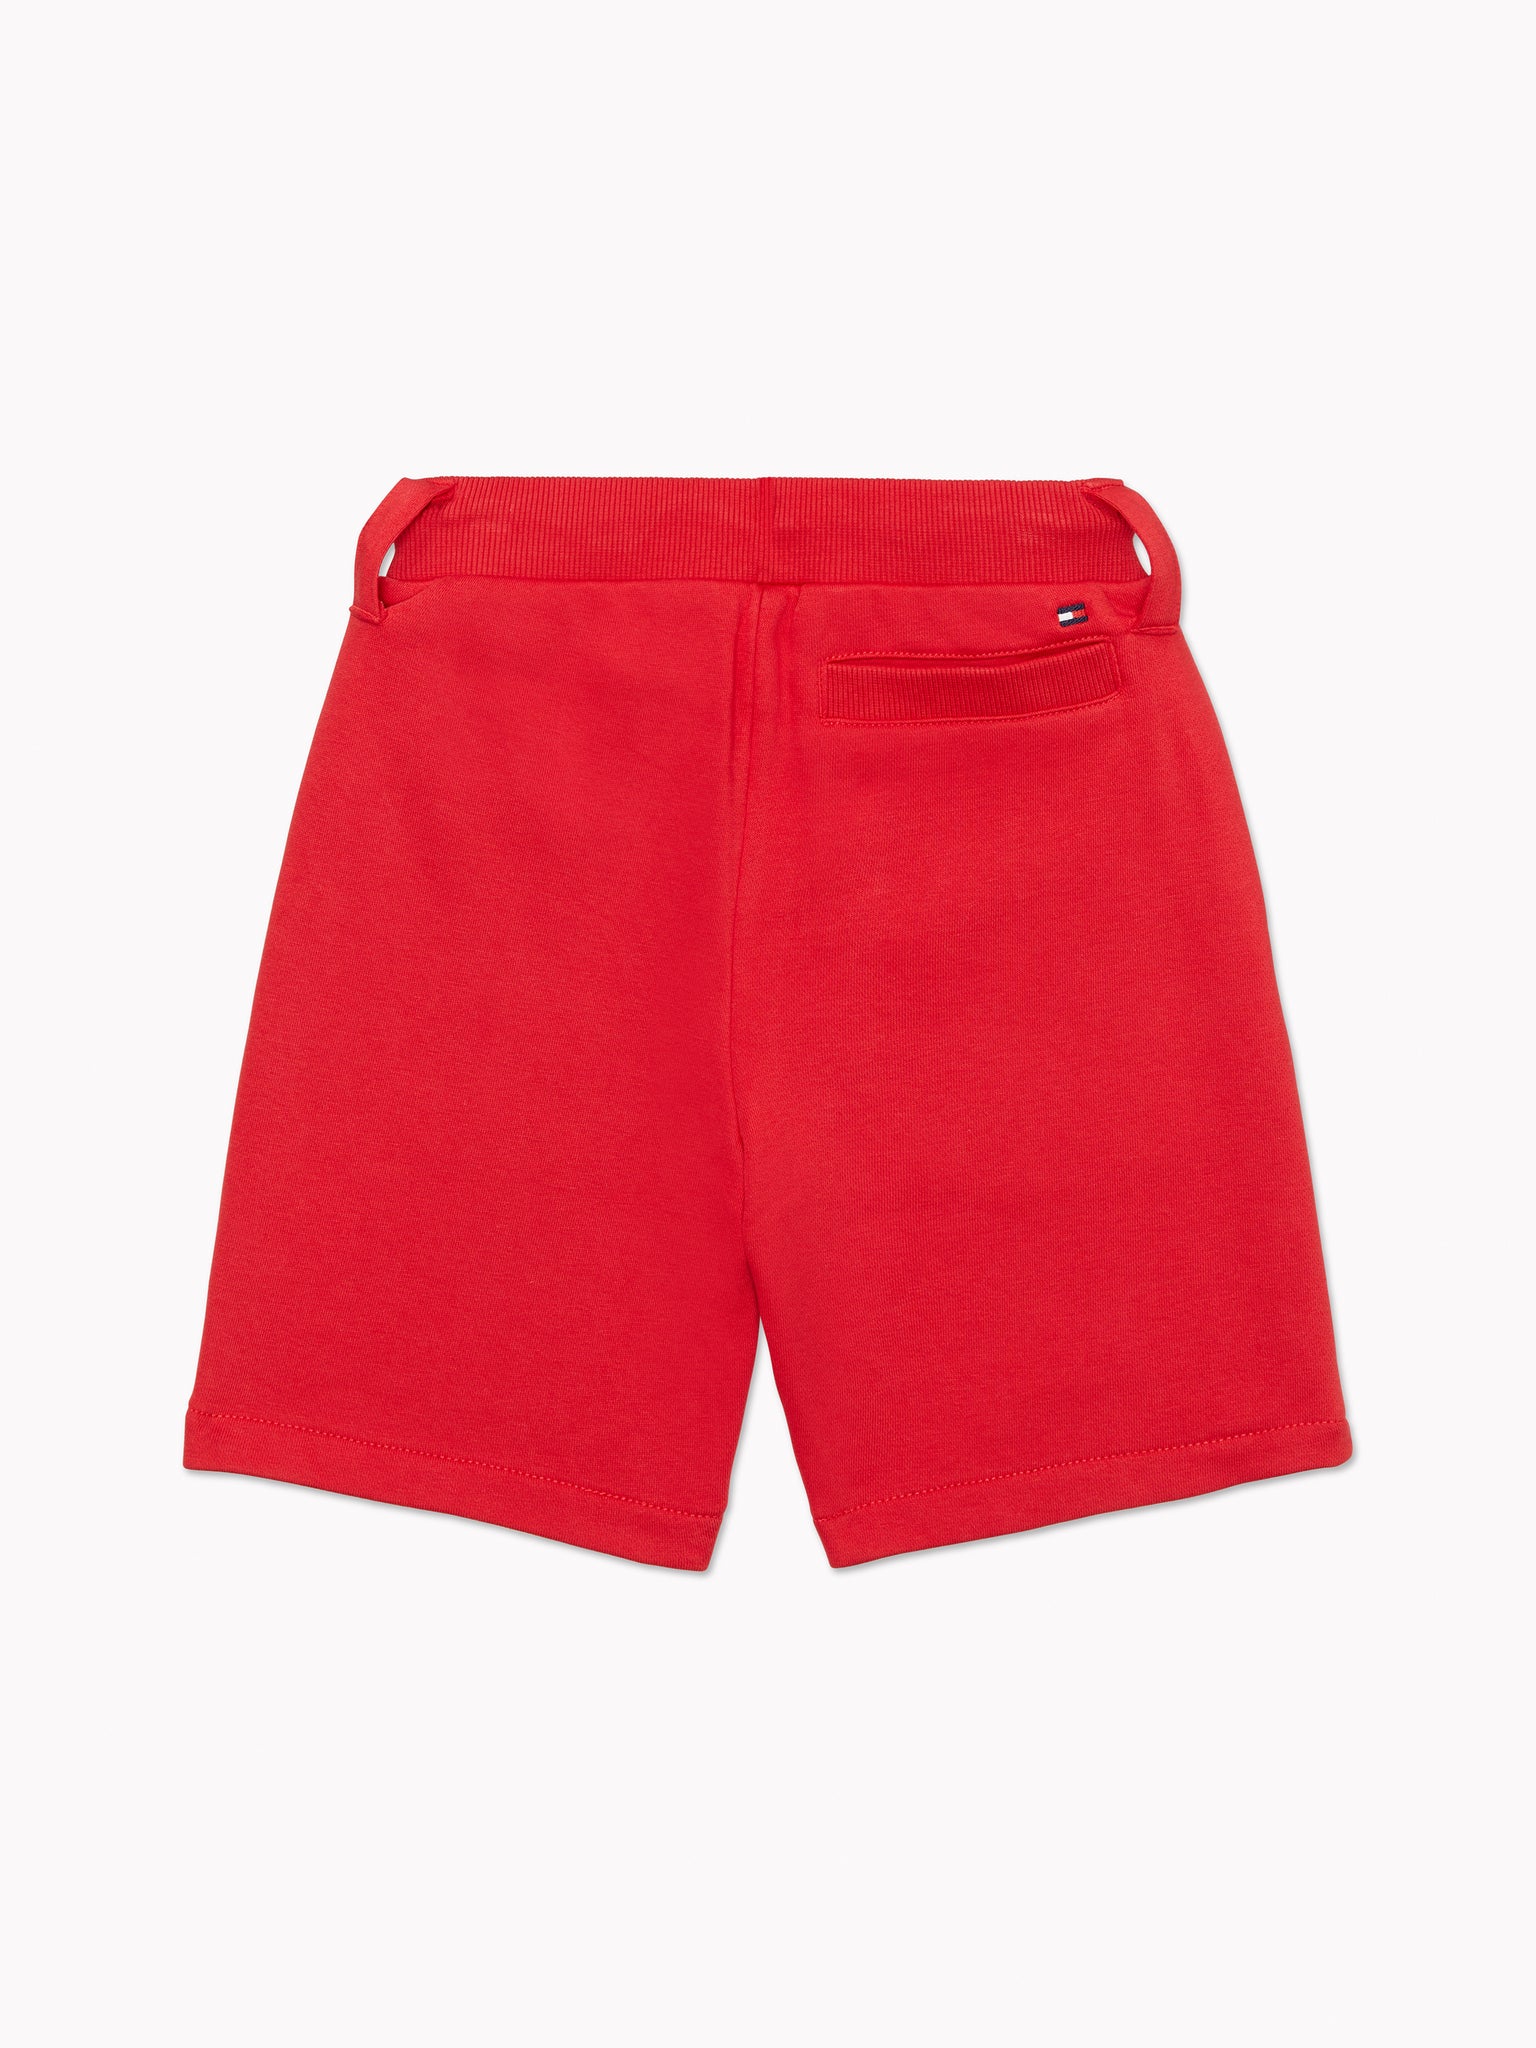 Essential Shorts (Kids) - Apple Red